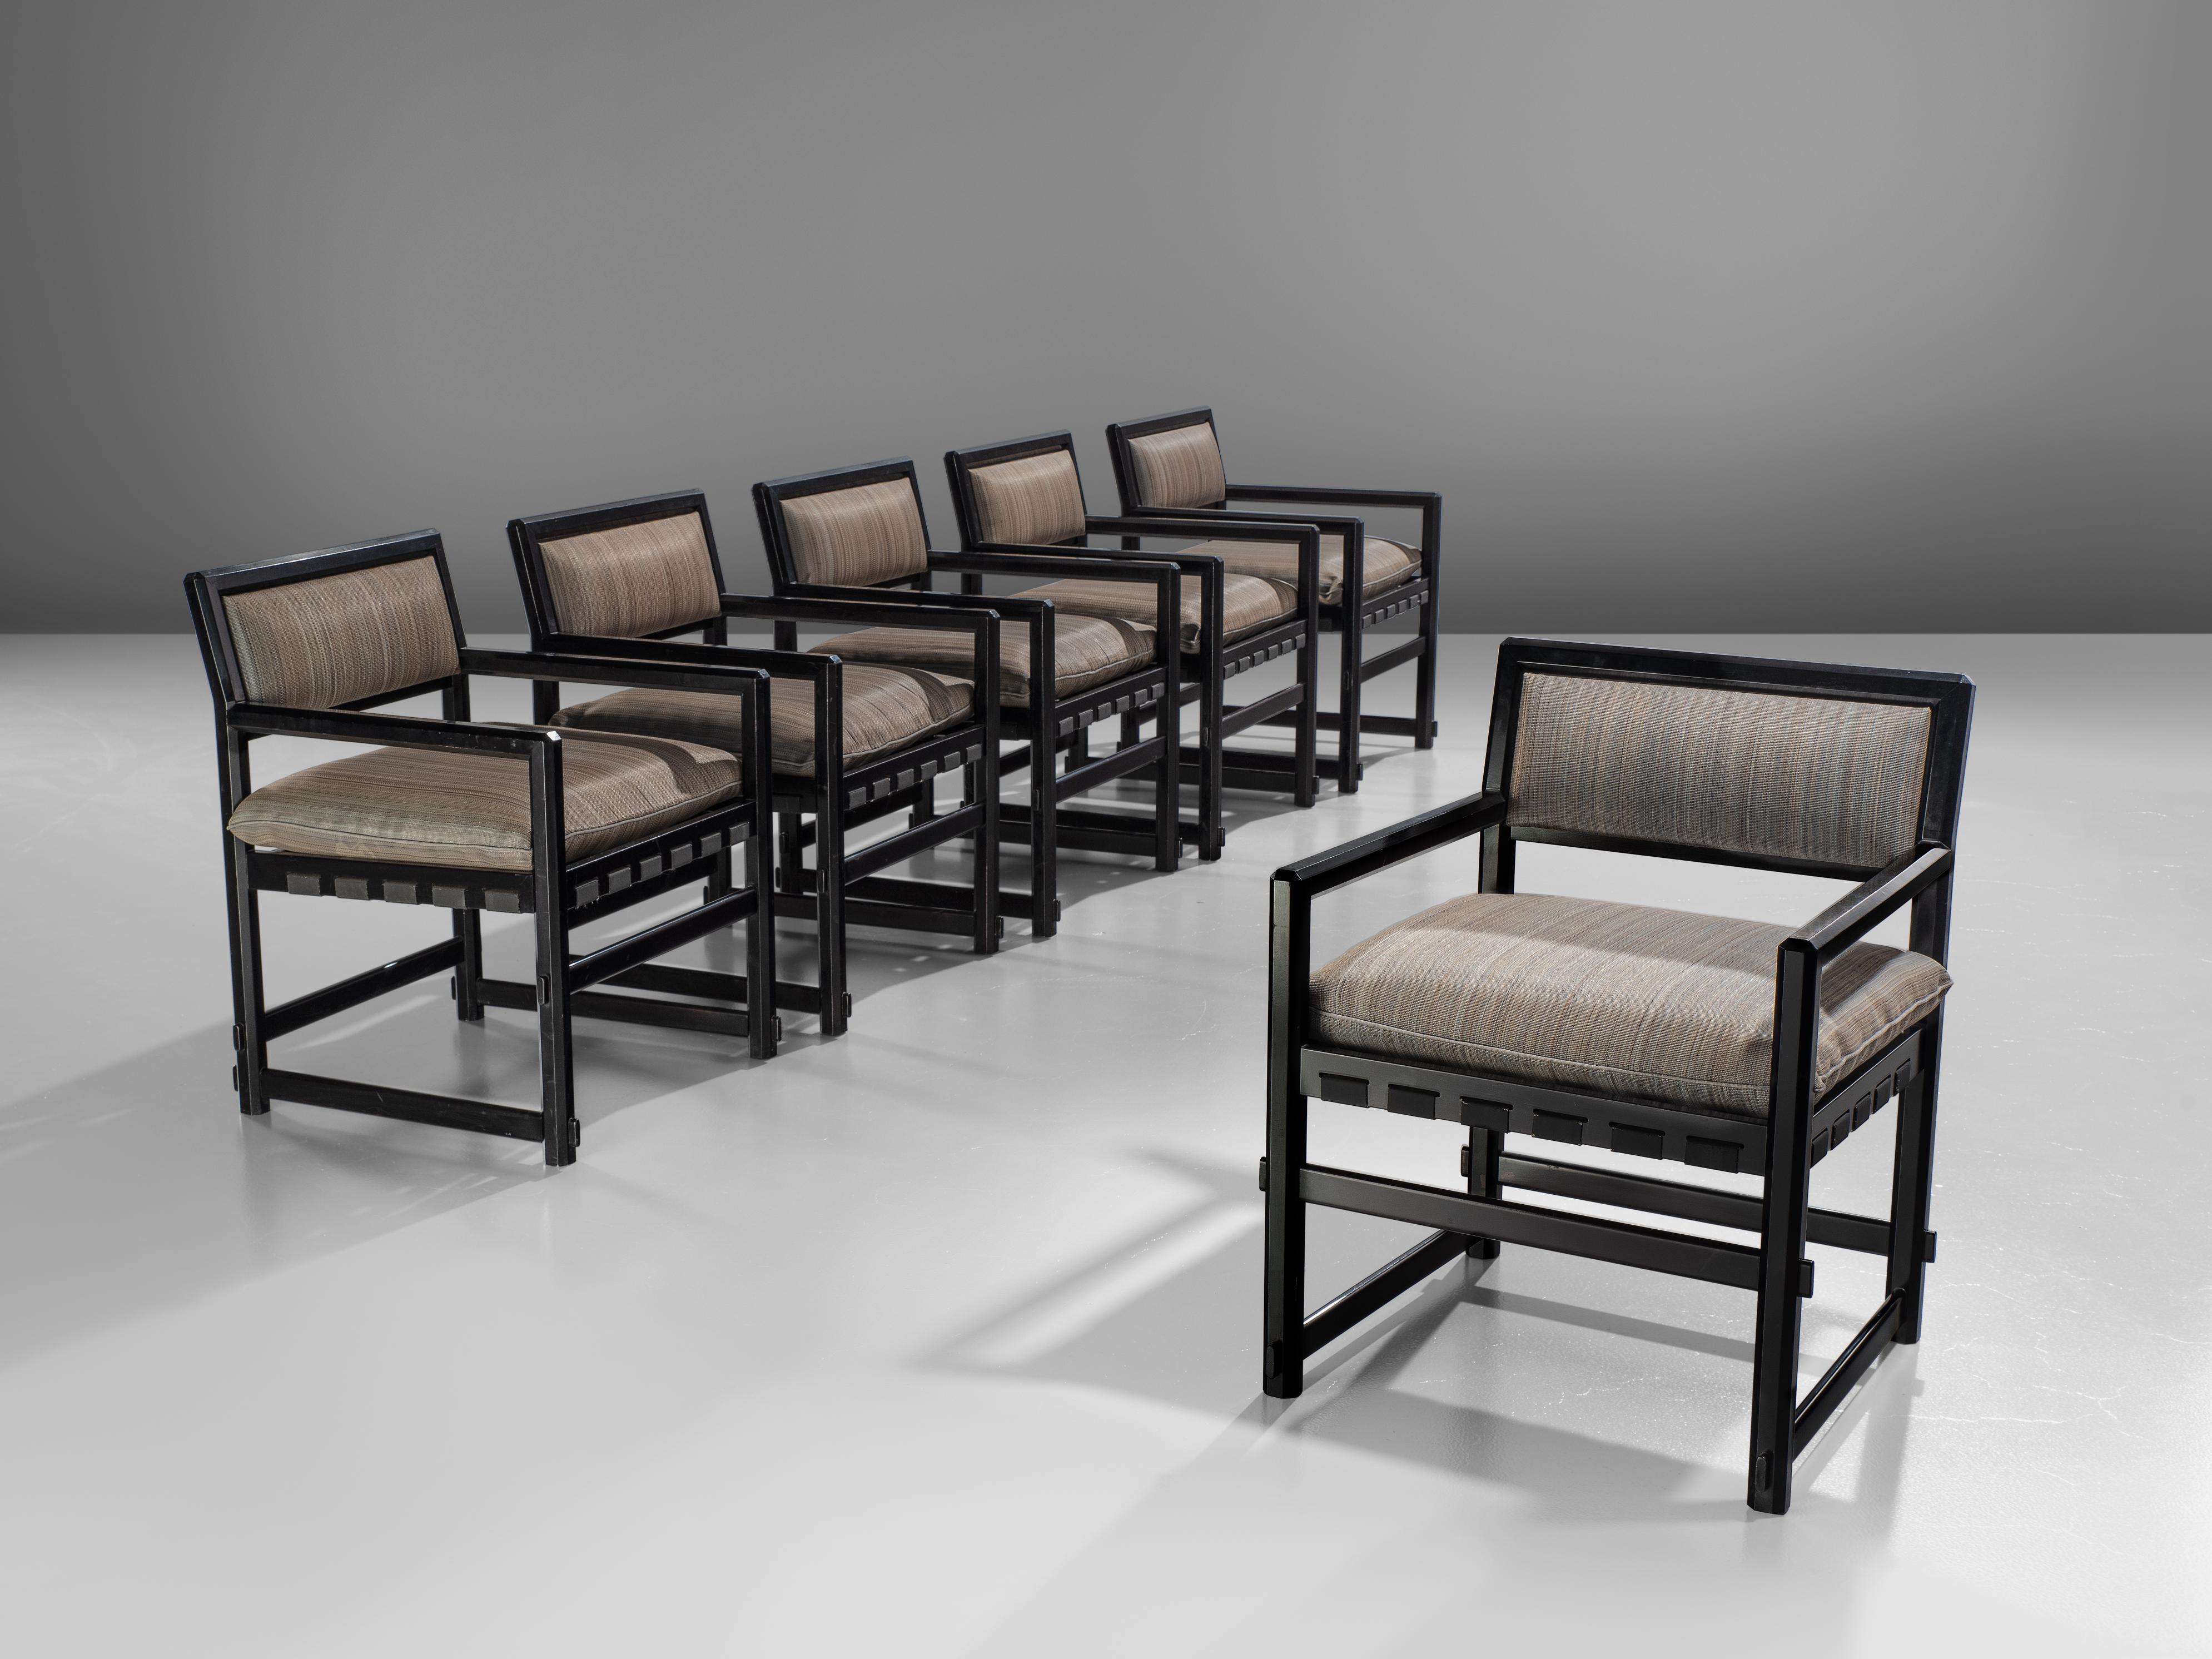 Set of six armchairs, lacquered black wood and fabric, design by Edward Wormely for Dunbar executed by Mobilier Universel, Jules Wabbes, Belgium, 1960s.

This set of six grand armchairs is executed with a rare black lacquered frame and soft striped